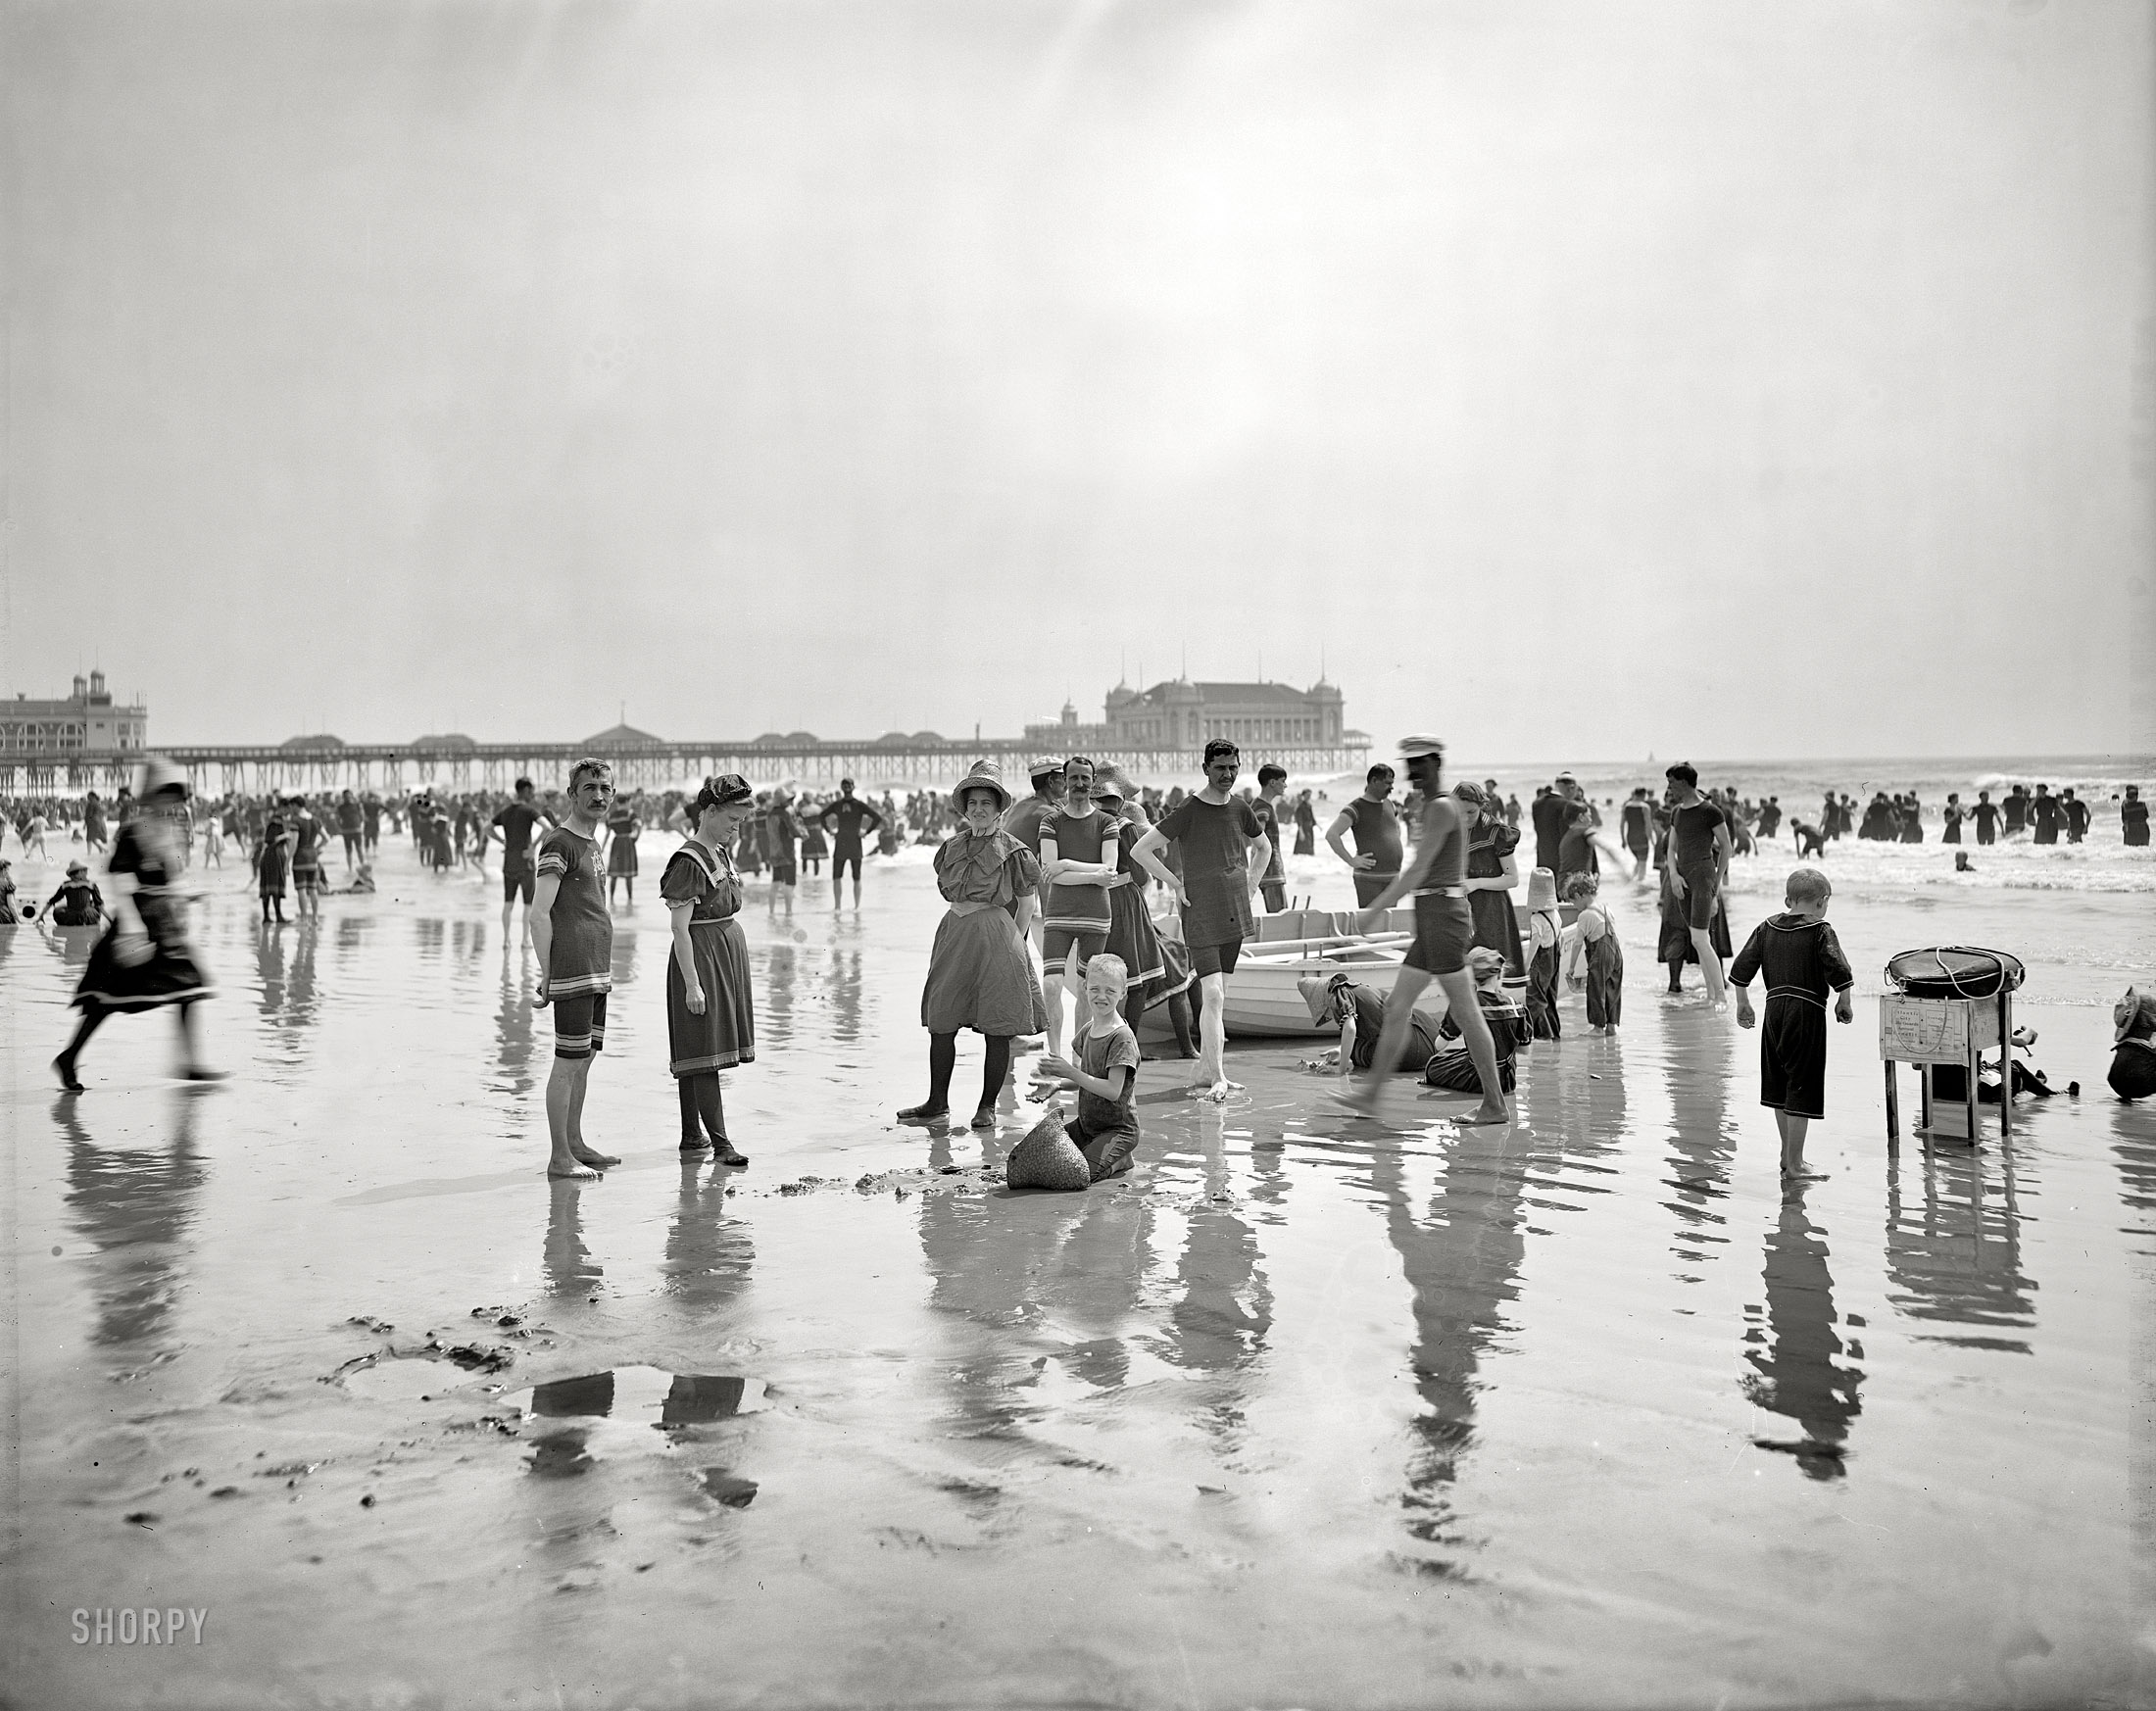 The Jersey Shore circa 1904. "On the beach, Atlantic City." Everyone please turn to face the time-portal! Detroit Publishing glass negative. View full size.